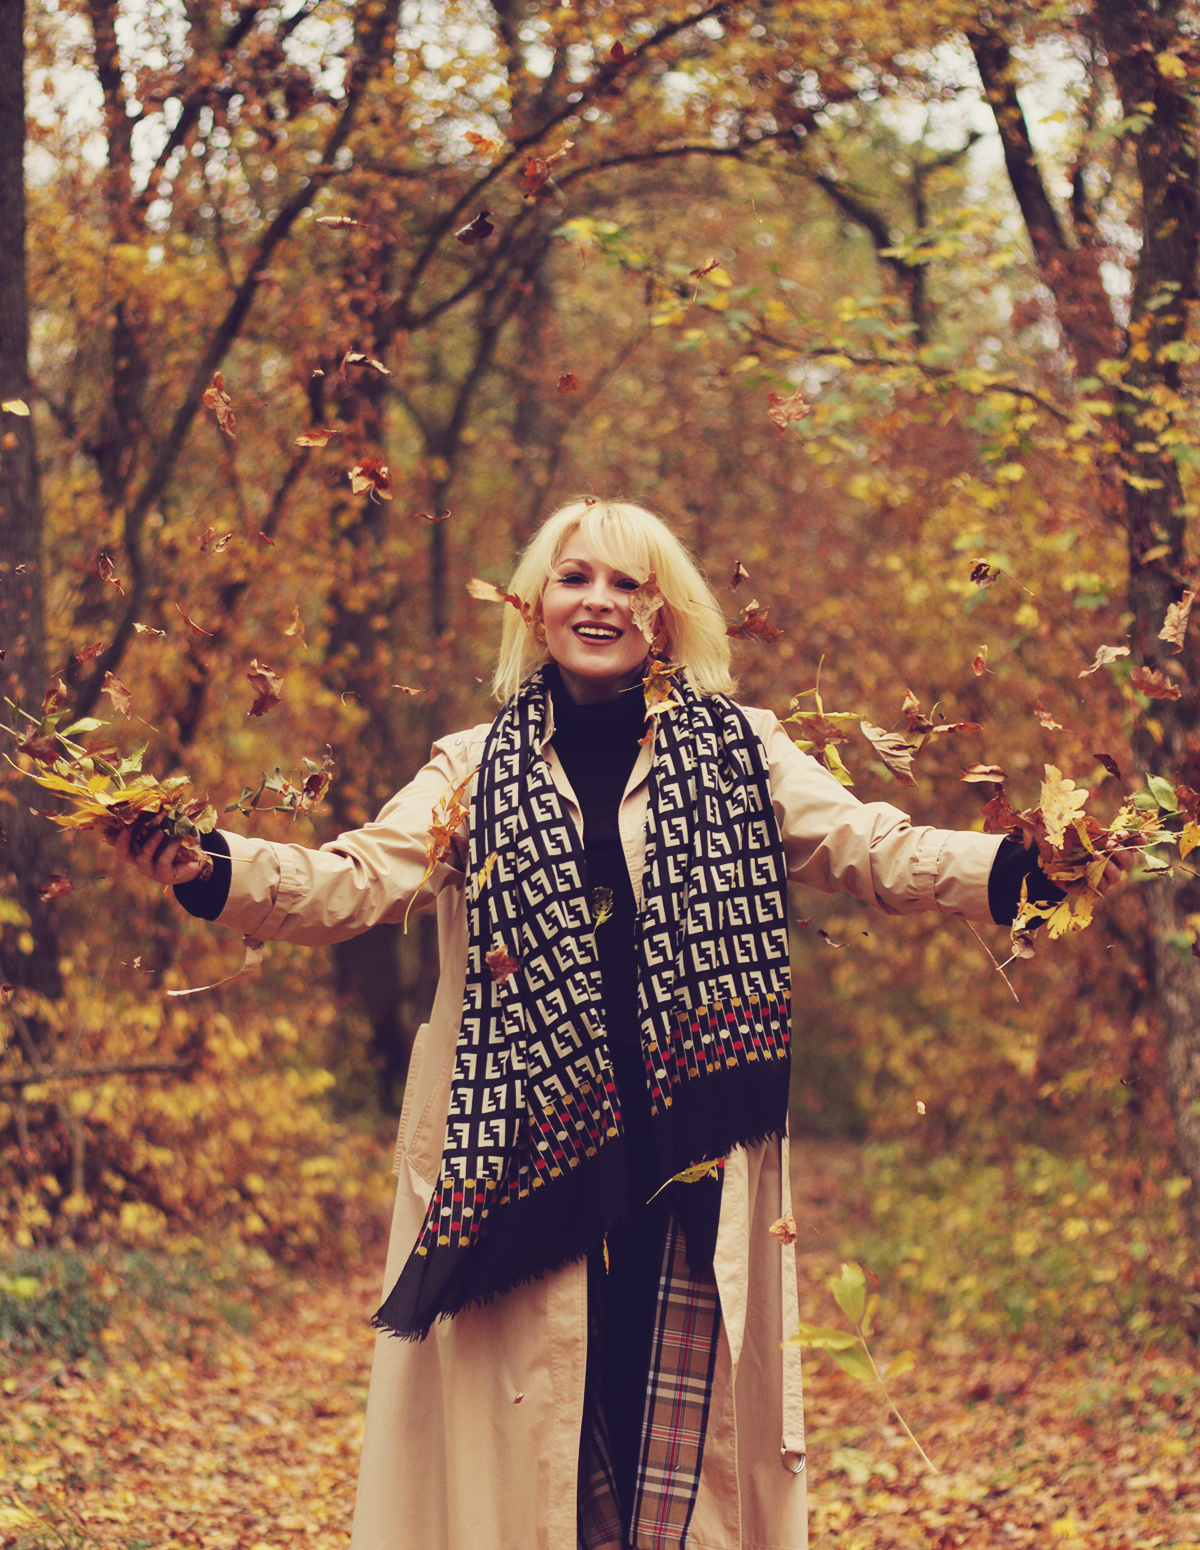 fendi scarf, long trench coat, autumn look, autumn, fall fashion, into the woods, leafs blowing in the air